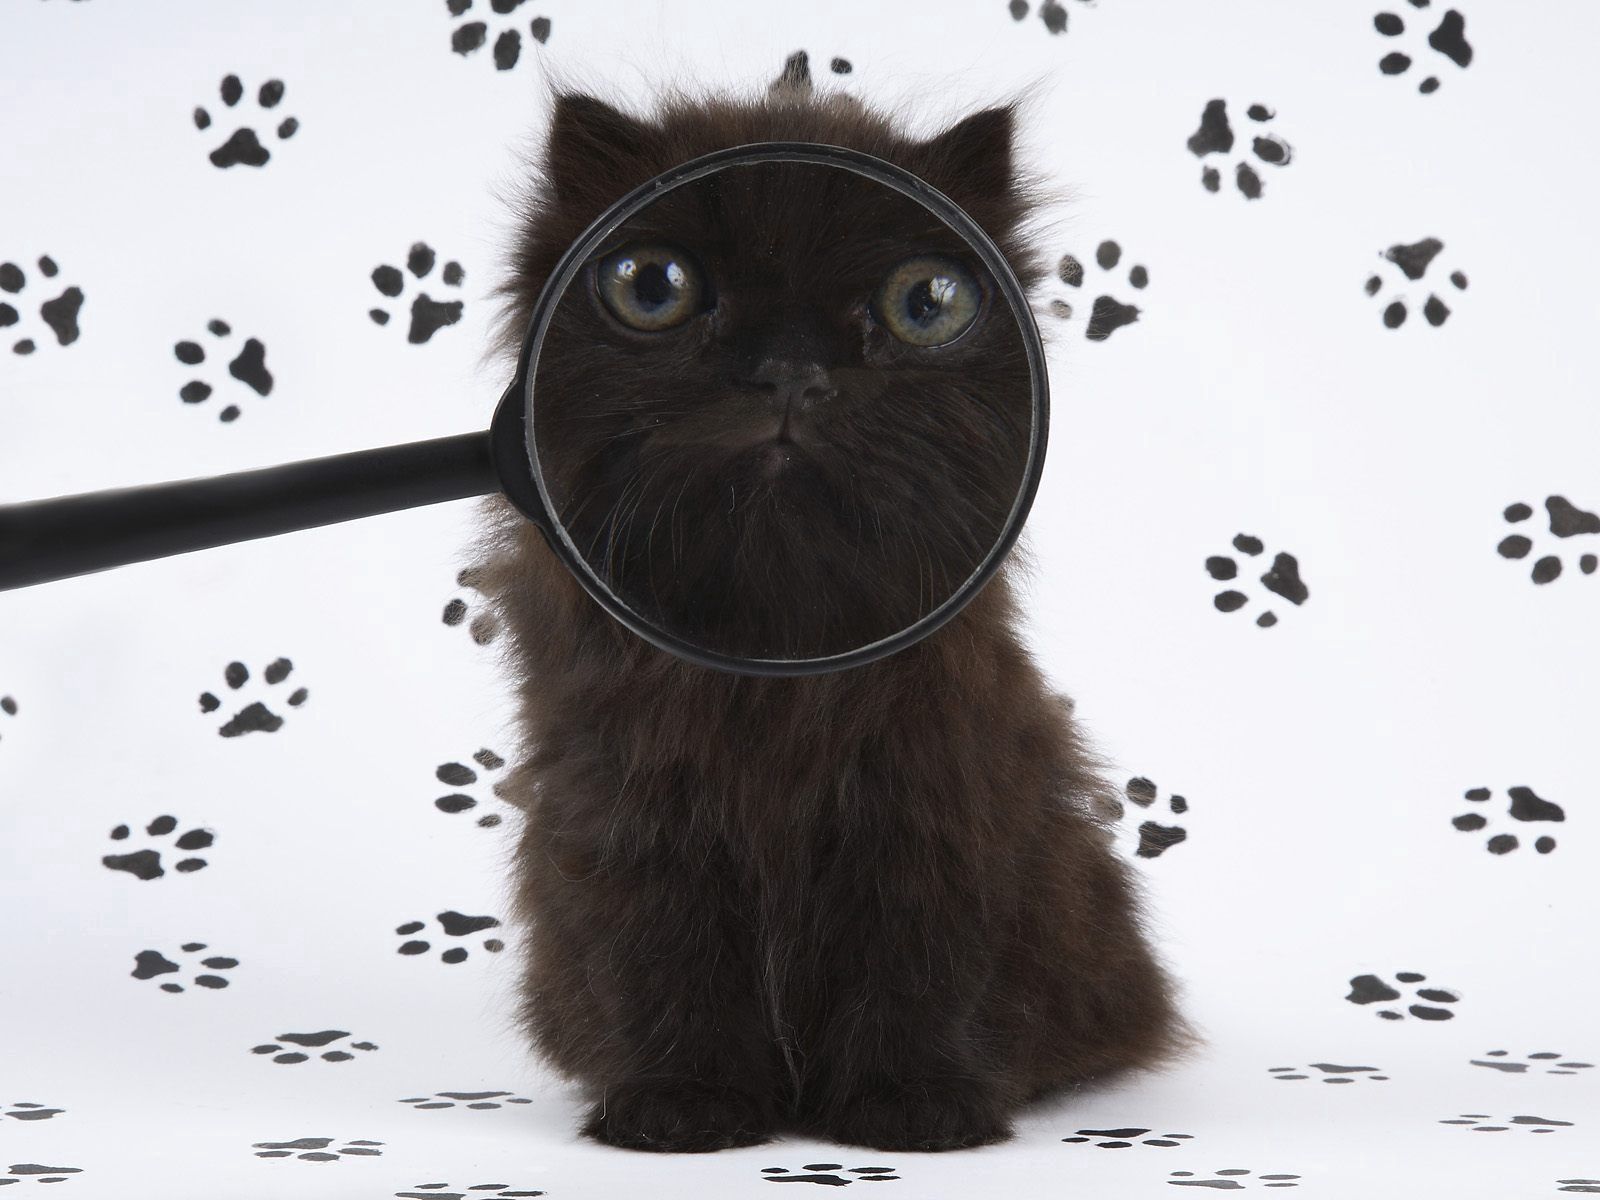 cat, animals, fluffy, muzzle, magnifier